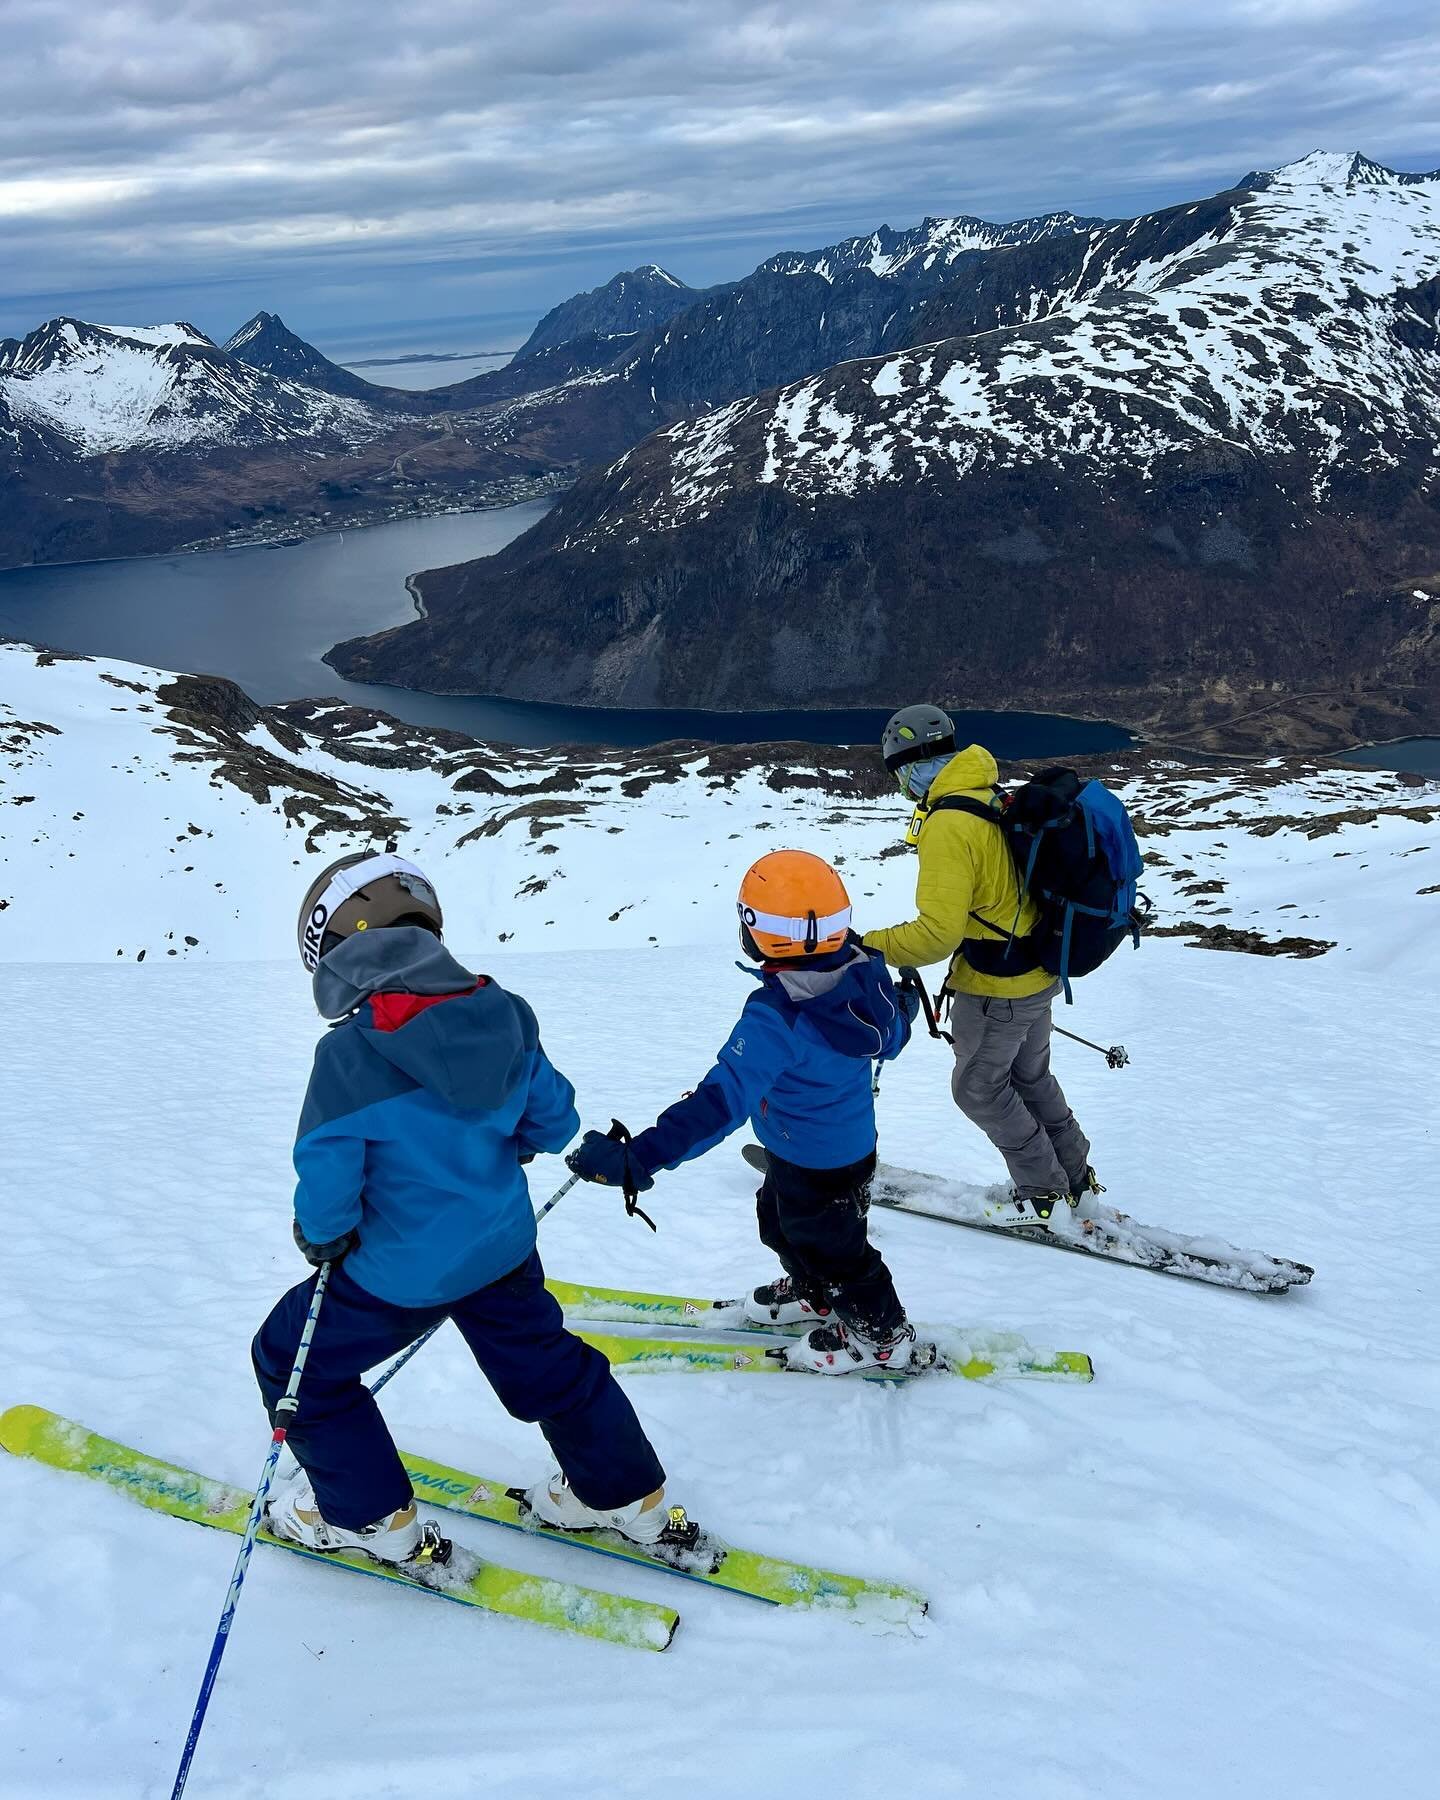 Taking ski-to-sea to the next level, all crammed into 24 hours under the midnight sun! A few recent highlights from the outer coast of Senja Island in northern Norway. 
&bull;
I&rsquo;ll save the not-so-fun parts for a separate post. As anyone who ha